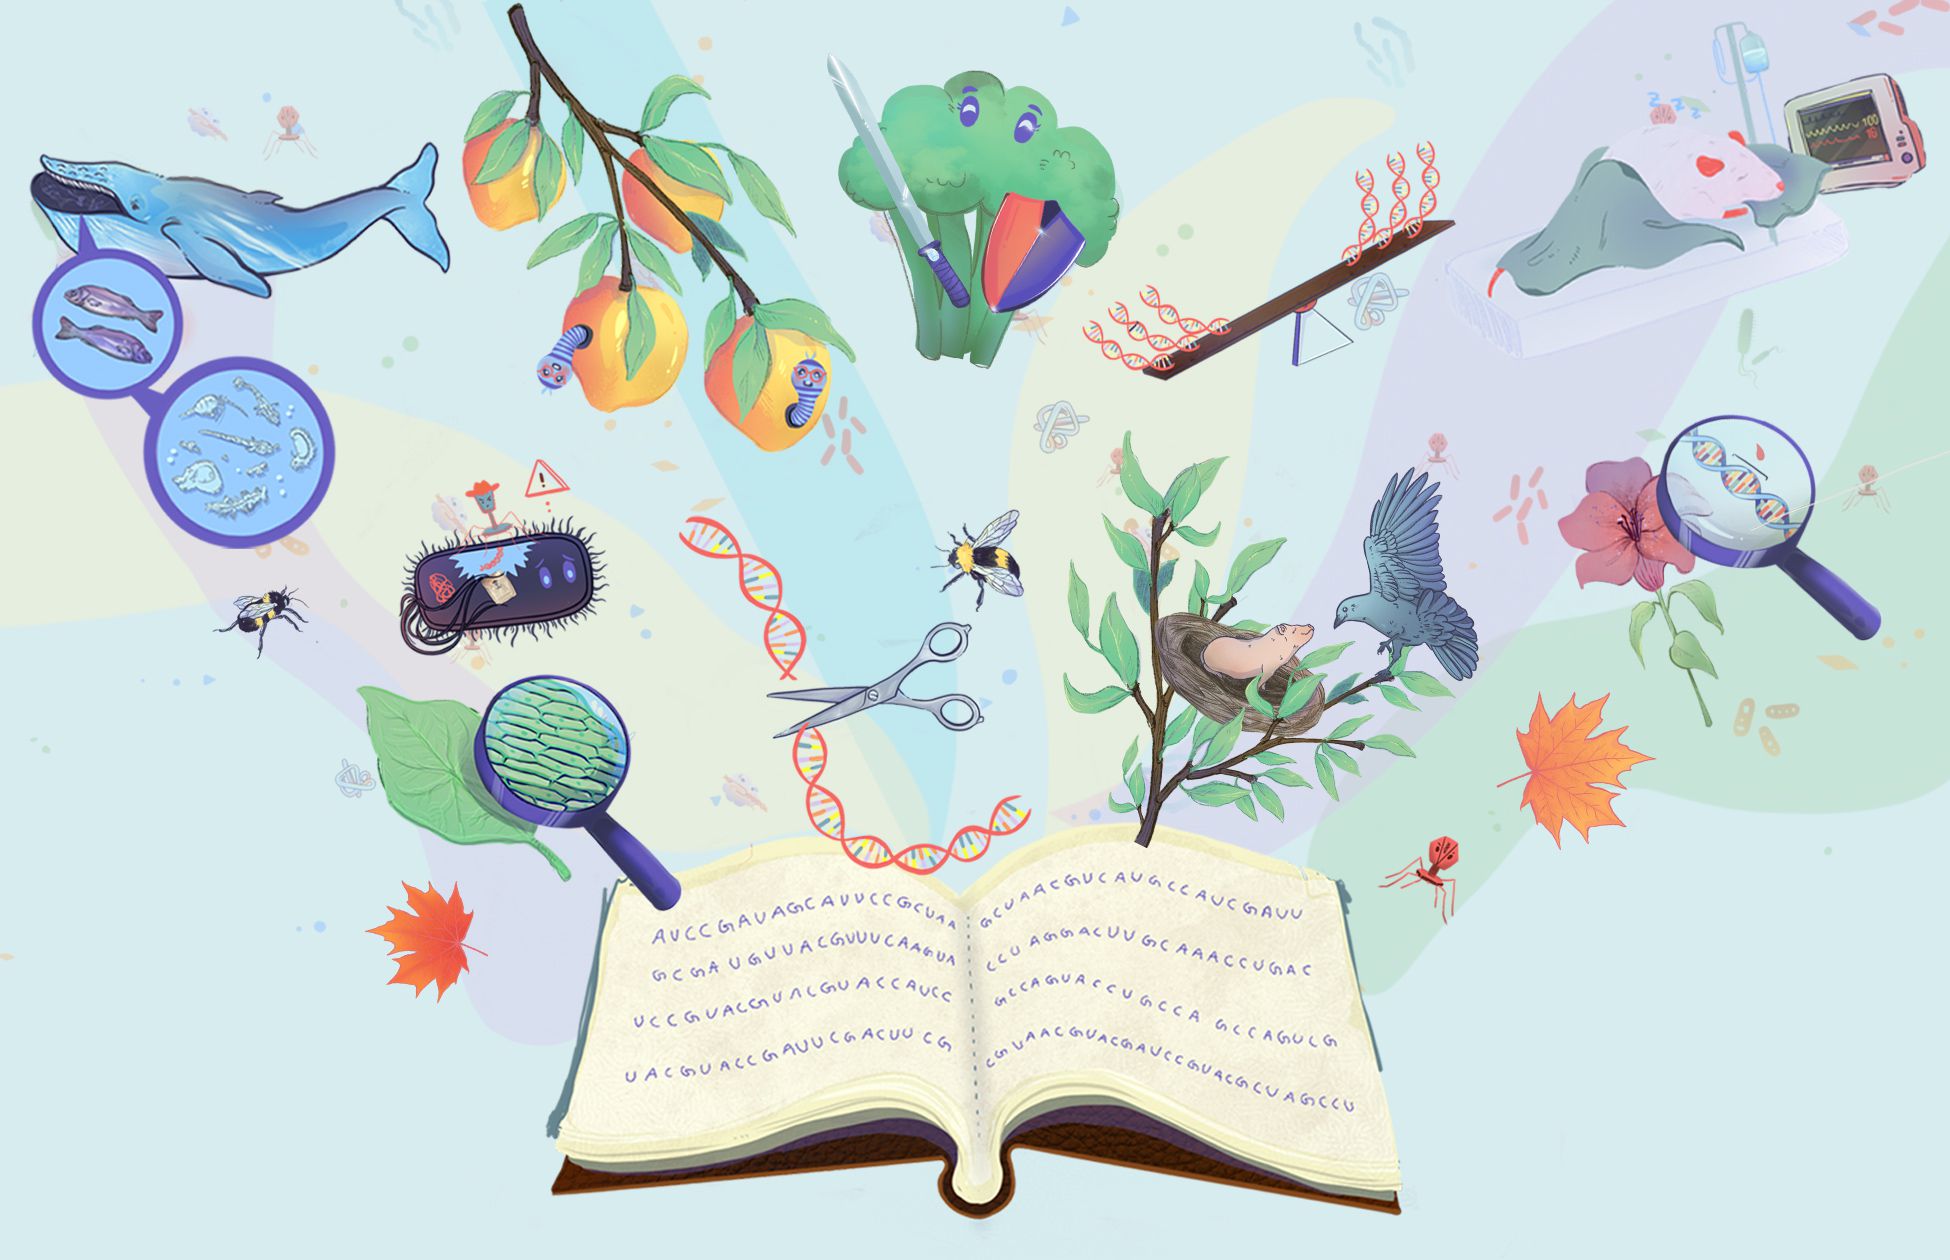 Illustration shows a book open with DNA sequences written inside of it and plants, animals, and microbes coming out of it, all relating to CRISPR